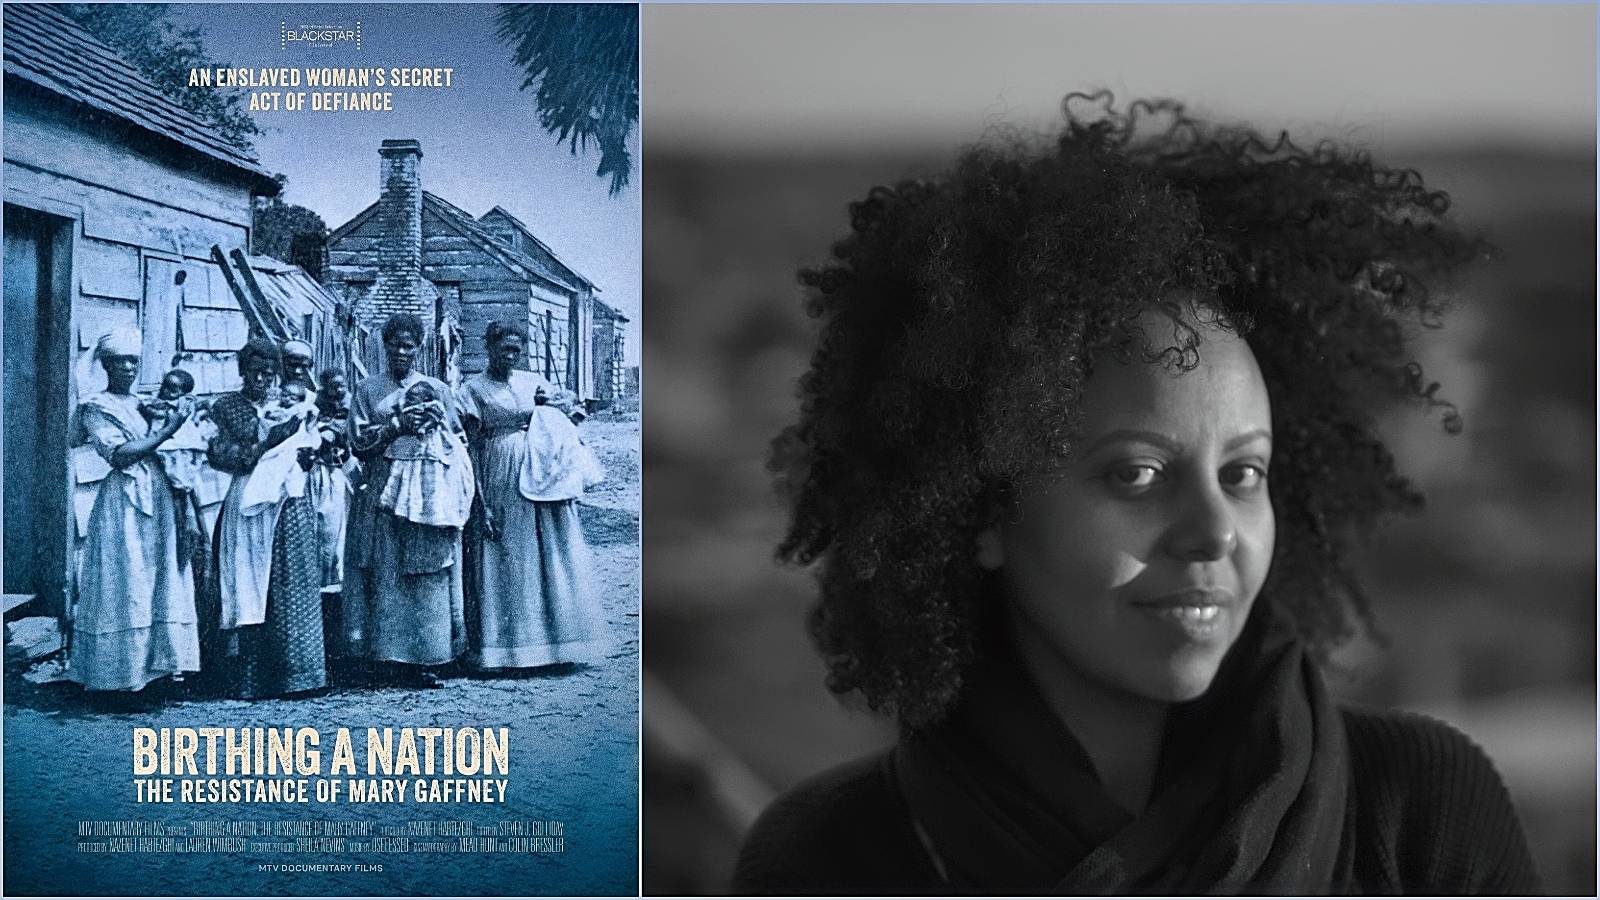 Director Nazenet Habtezghi is behind the documentary "Birthing a Nation: The Resistance of Mary Gaffney."